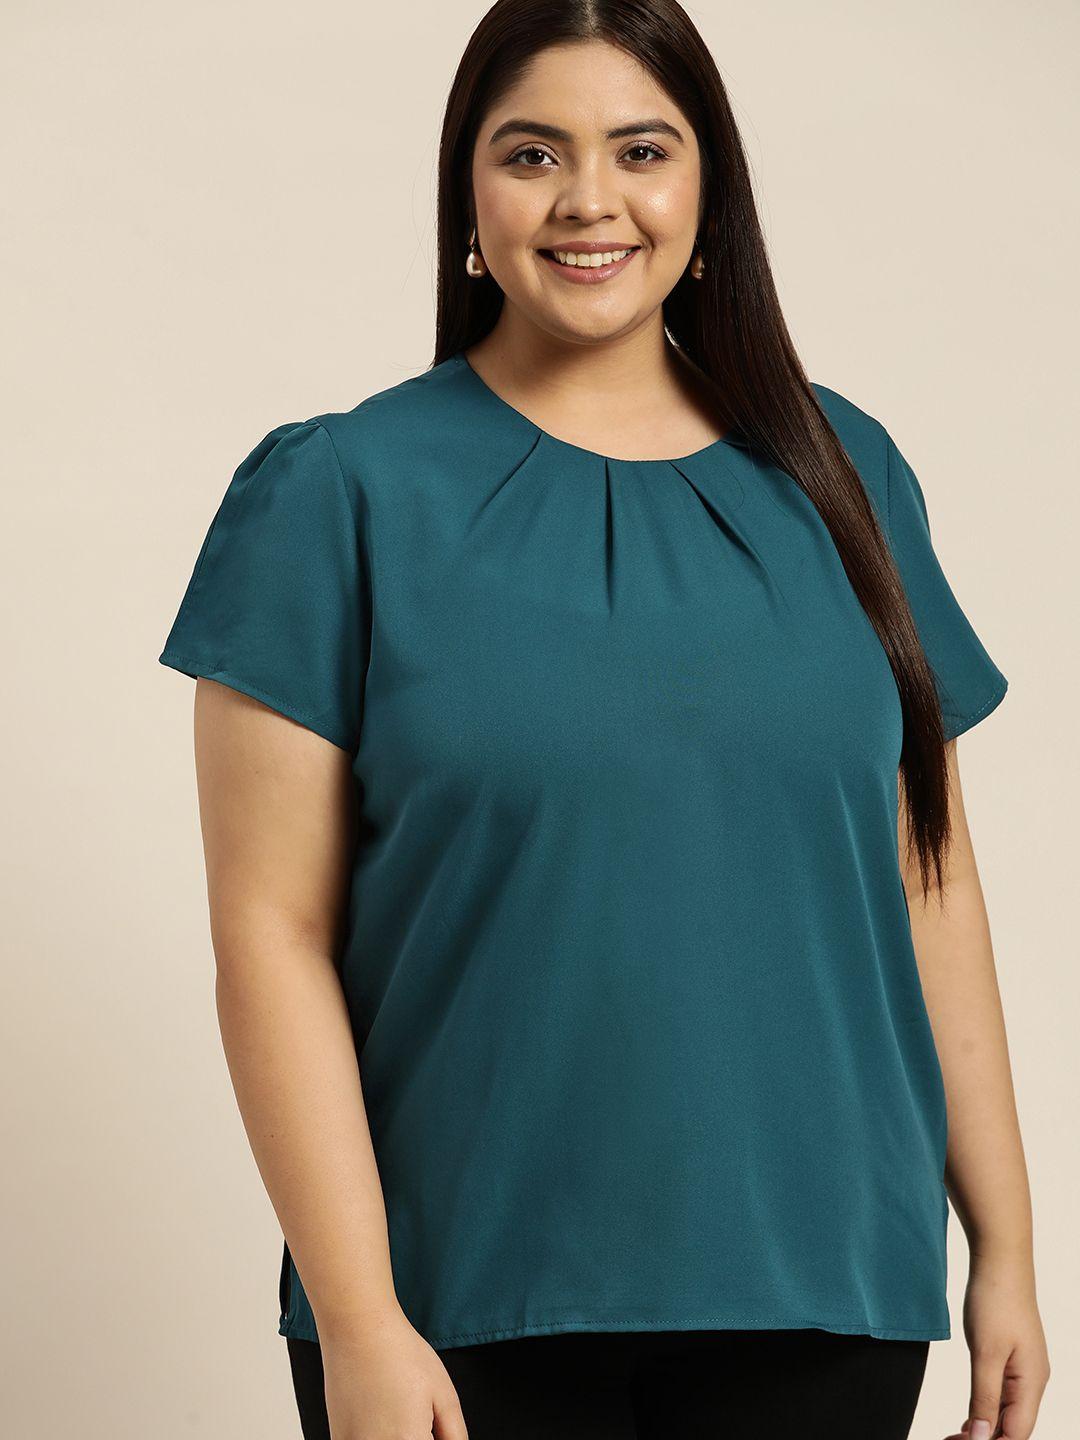 sztori plus size teal blue solid top with neck gathers